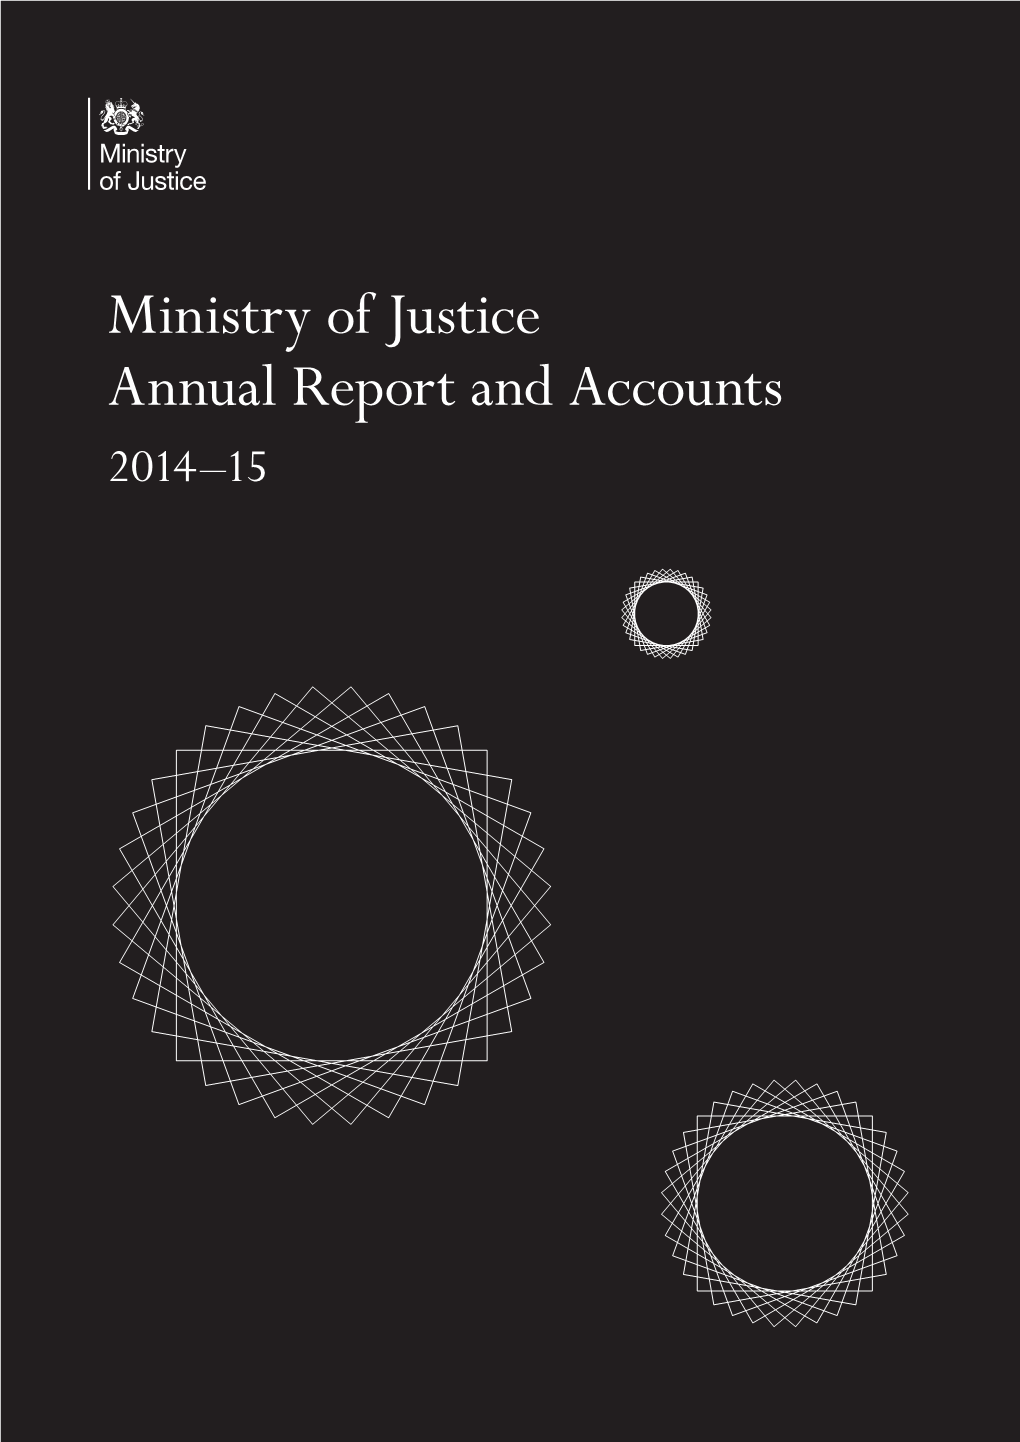 Ministry of Justice Annual Report and Accounts, 2014-15